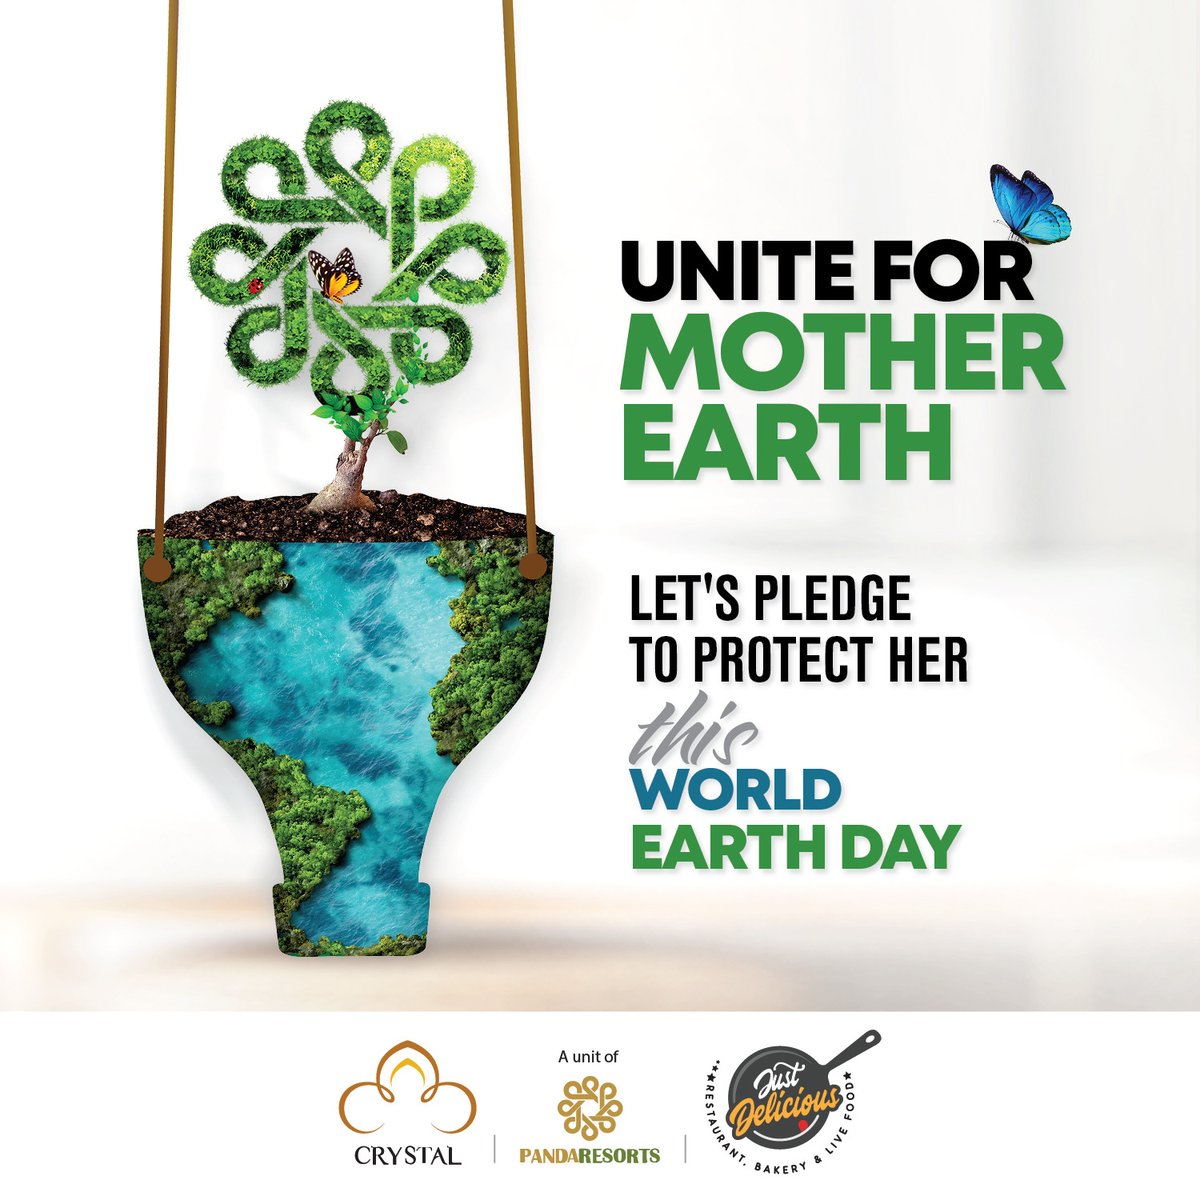 Here's to our one and only home, Earth. 🌏

#EarthDay #EarthDay2024 #WorldEarthDay #WorldEarthDay2024 #EarthDayEveryDay #ClimateChange #Sustainability #ActOnClimate #PlanetVsPlastics #InvestInOurPlanet #ProtectOurFuture #SaveEarth #PandaResorts #CrystalCrown #JustDelicious